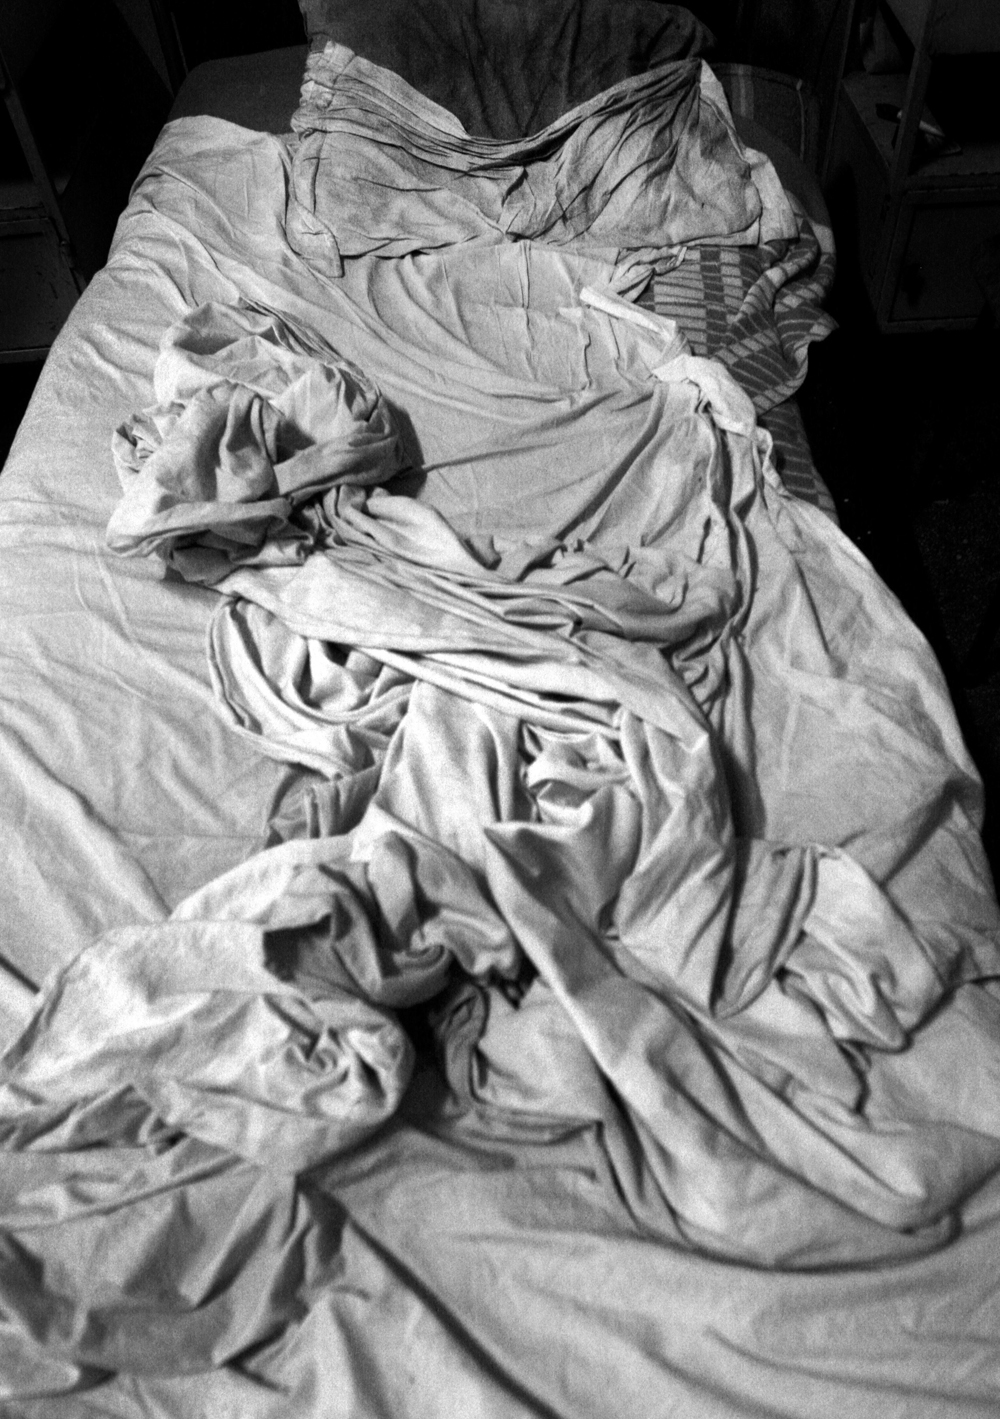 Dirty sheets lay crumpled on a patient's bed in the psychiatry ward of a county hospital in Bulgaria on August 23, 2007. 